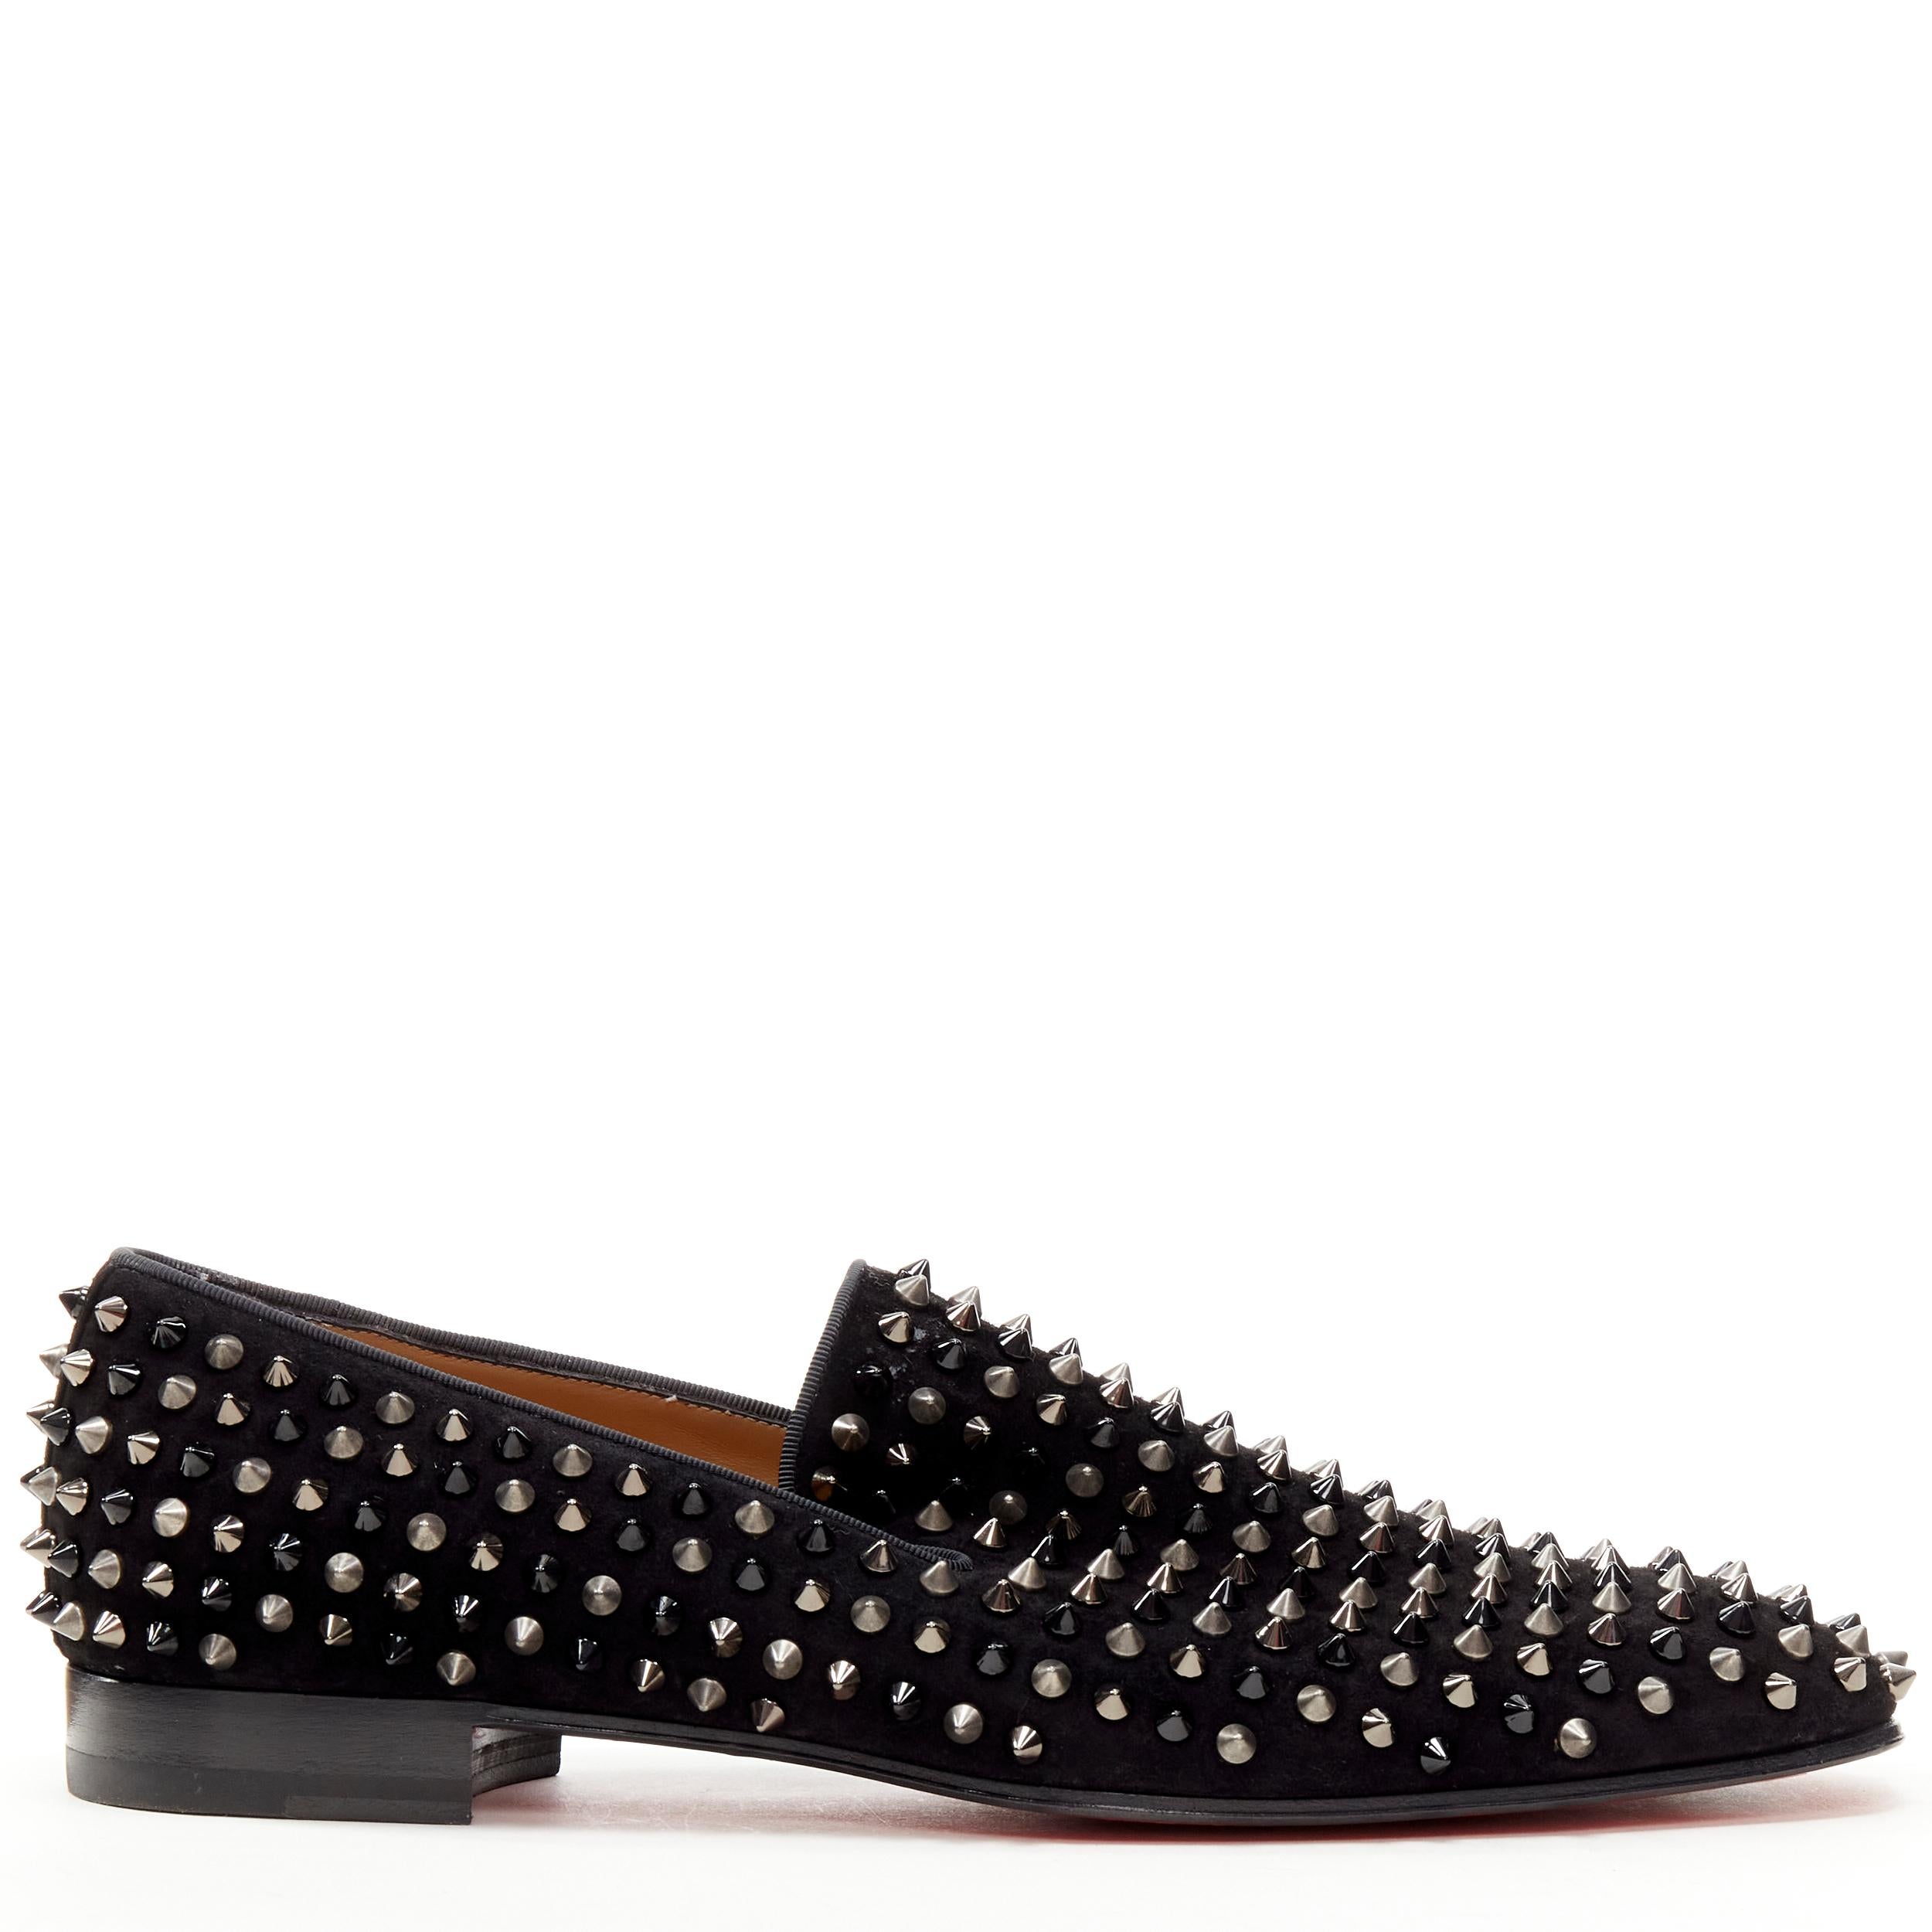 CHRISTIAN LOUBOUTIN Dandelion Spikes black mixed silver stud loafer EU42.5 
Reference: TGAS/C01160 
Brand: Christian Louboutin 
Model: Dandelion Spikes 
Material: Suede 
Color: Black 
Pattern: Solid 
Extra Detail: Stacked wooden heel. 
Made in: